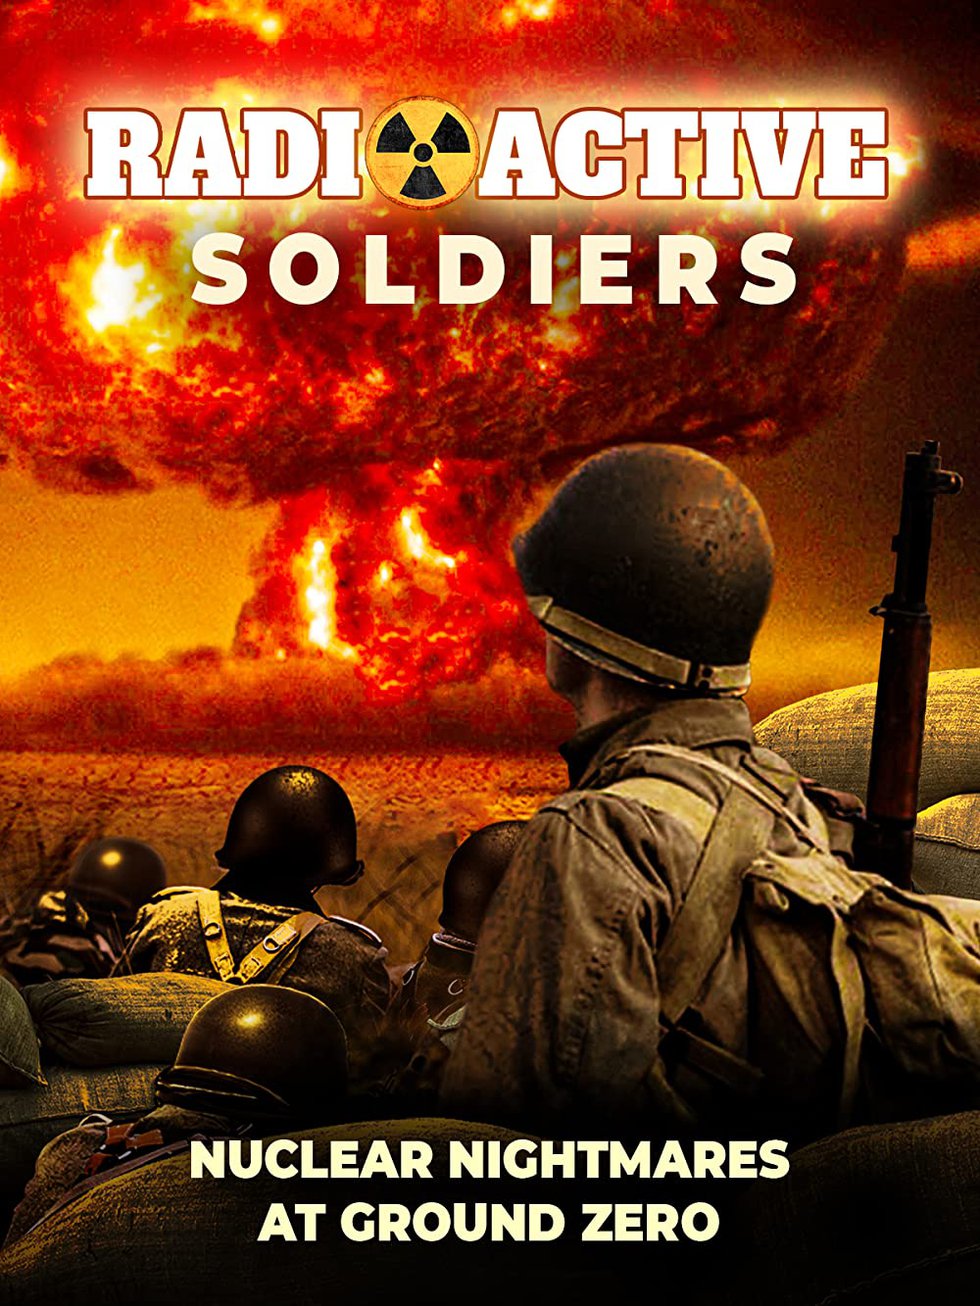 Radioactive Soldiers: Nuclear Nightmares at Ground Zero DVD.jpg